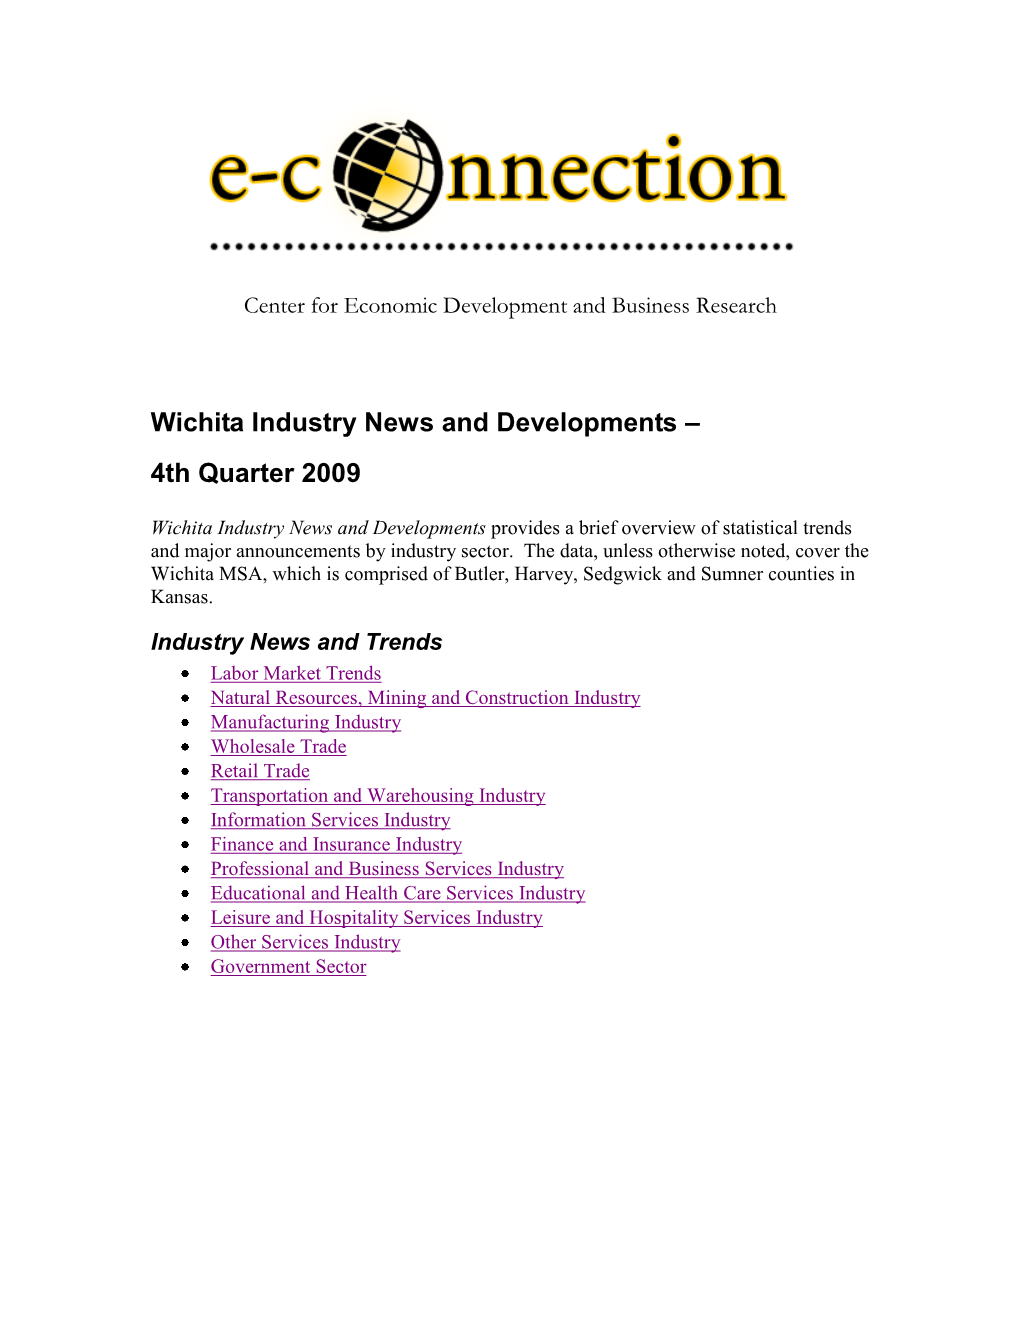 2Nd Quarter 2006 Industry News and Developments